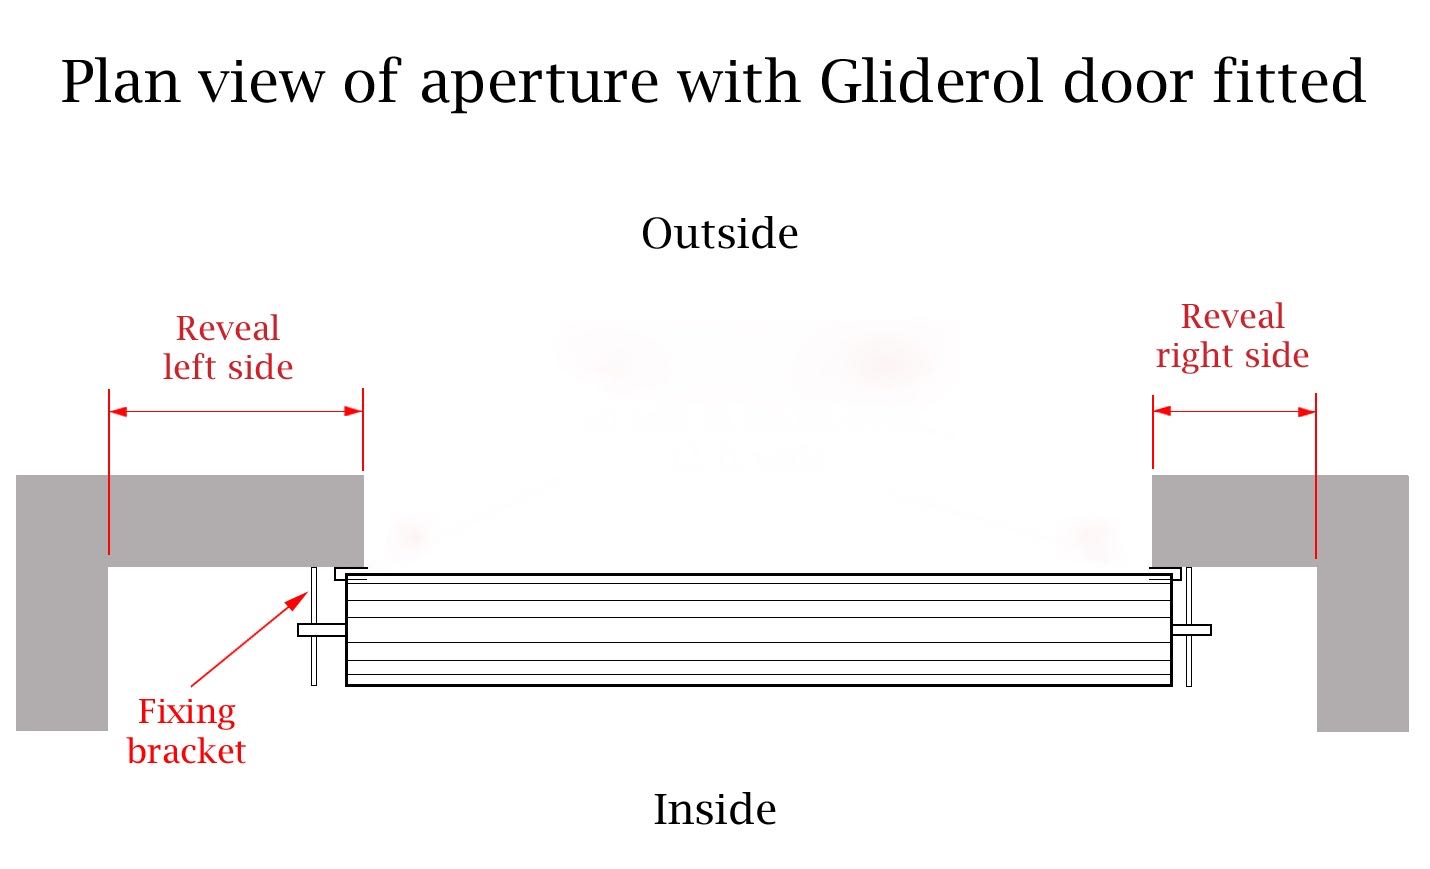 Plan view of aperture with Gliderol Mini door fitted